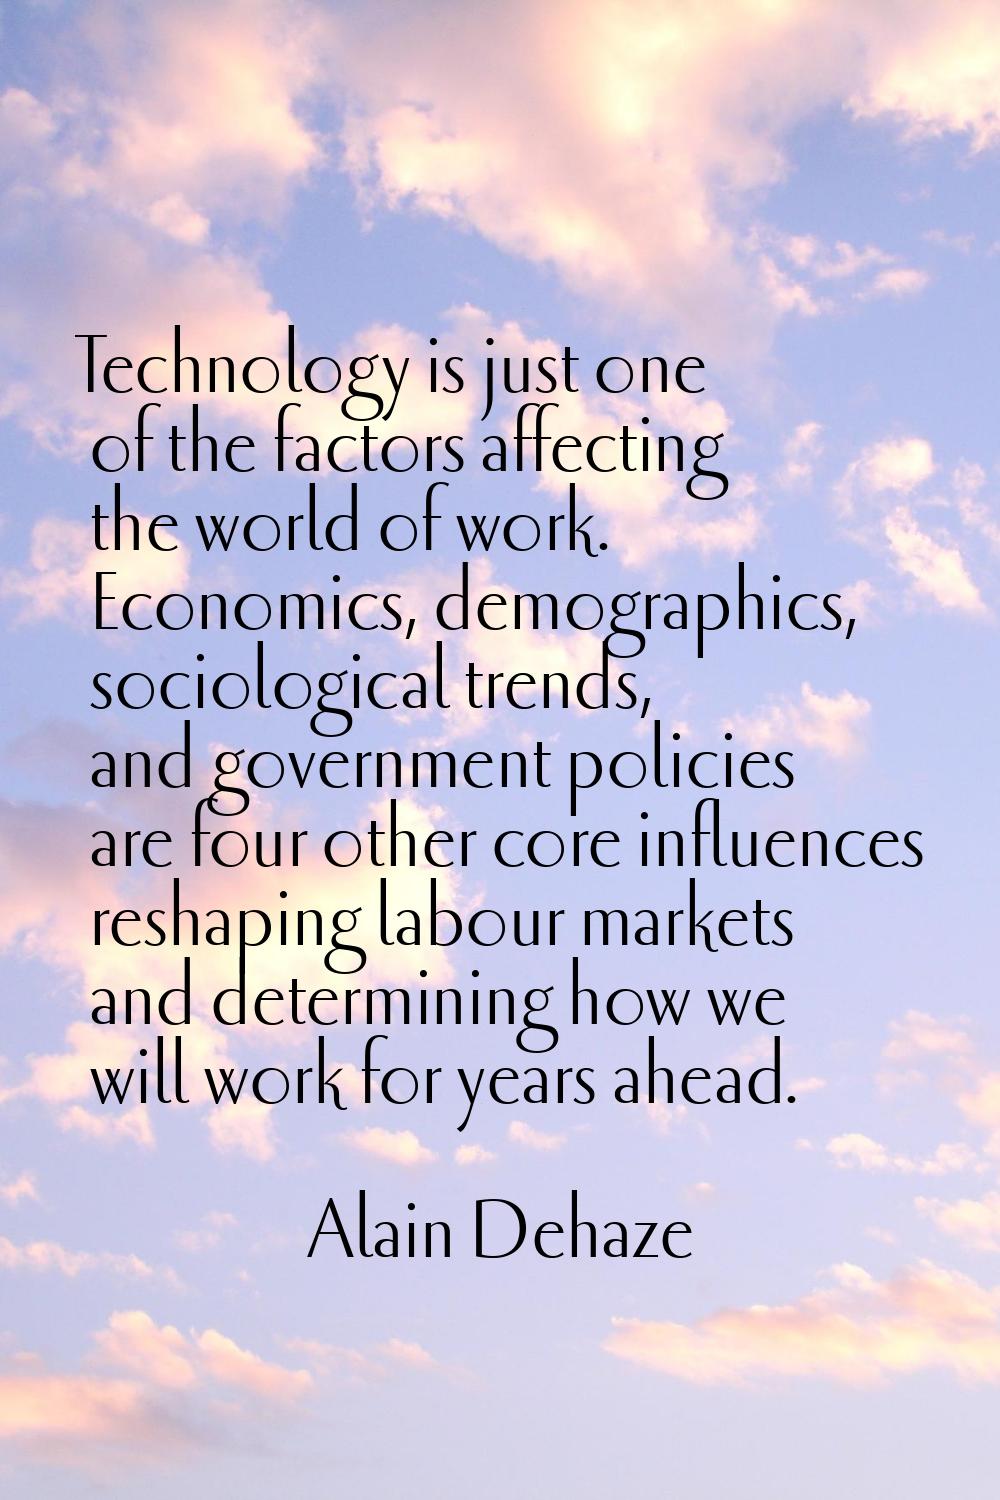 Technology is just one of the factors affecting the world of work. Economics, demographics, sociolo